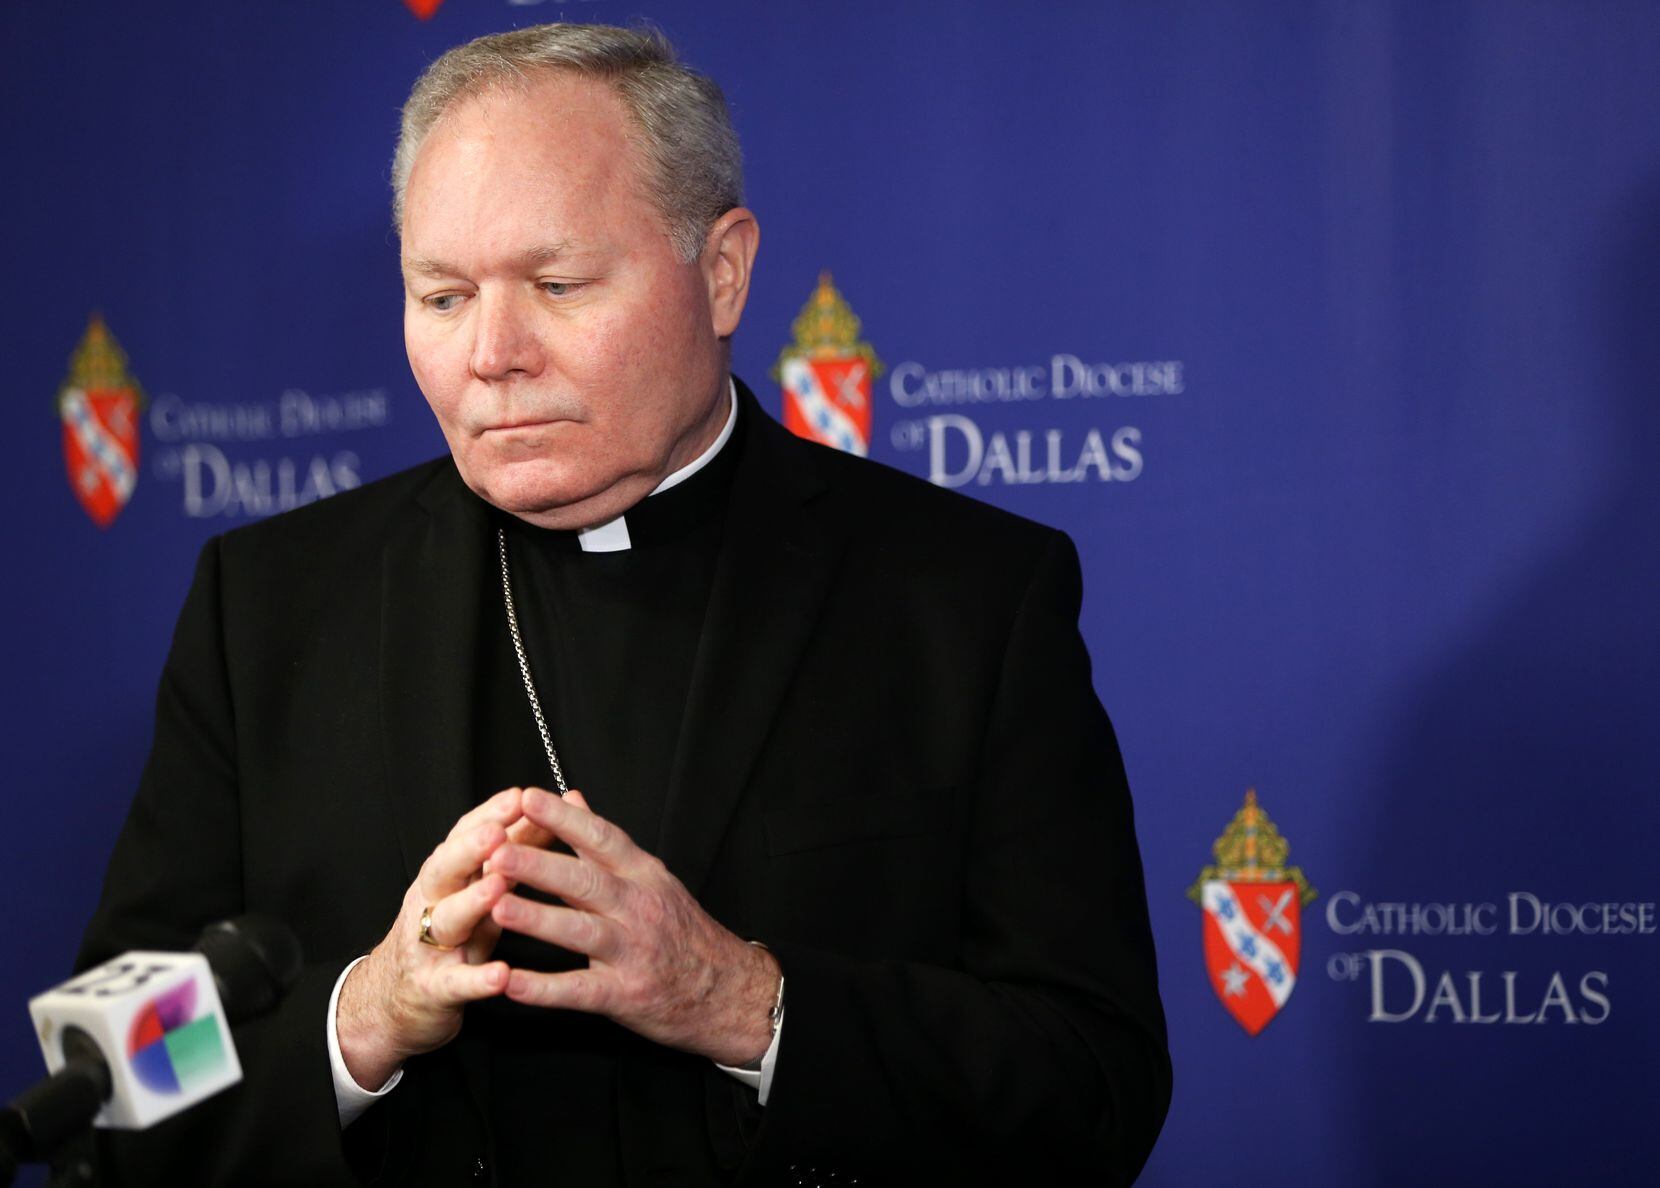 Dallas Bishop Edward Burns speaks during a news conference at the Catholic Diocese of Dallas in Dallas on Thursday, Jan. 31, 2019. The Dallas diocese released a list of names of 31 clergy credibly accused of sexual abuse of a minor from 1950 to present. (Rose Baca/Staff Photographer)